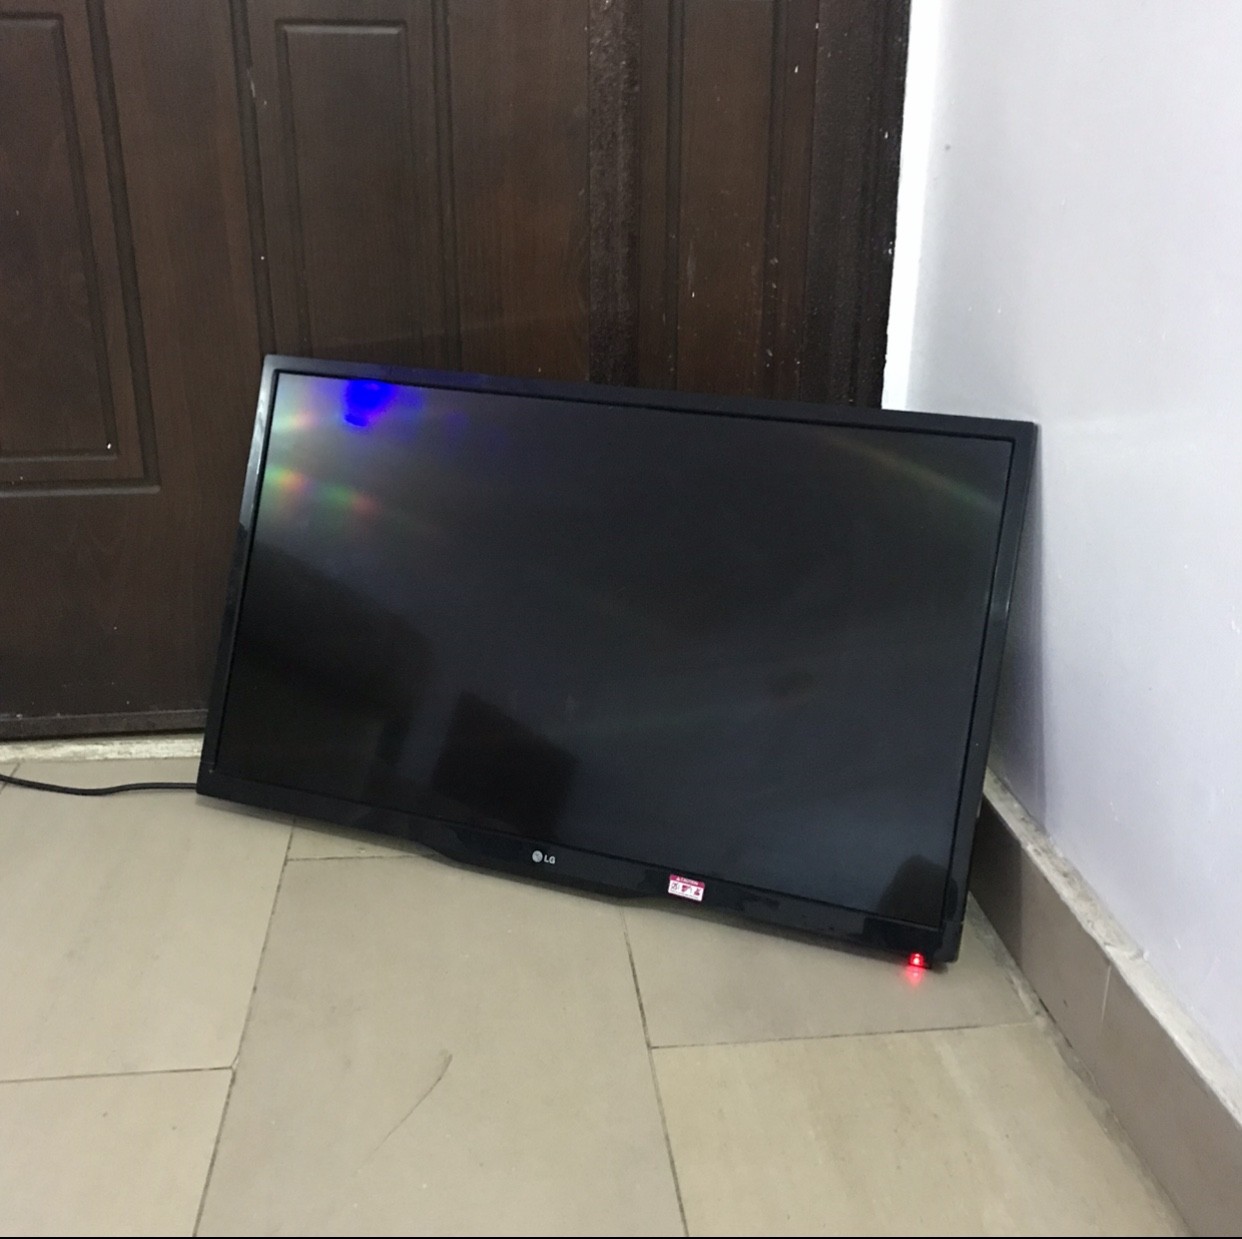 Clean 32inches Lg Led Full Hd Tv For-Sale